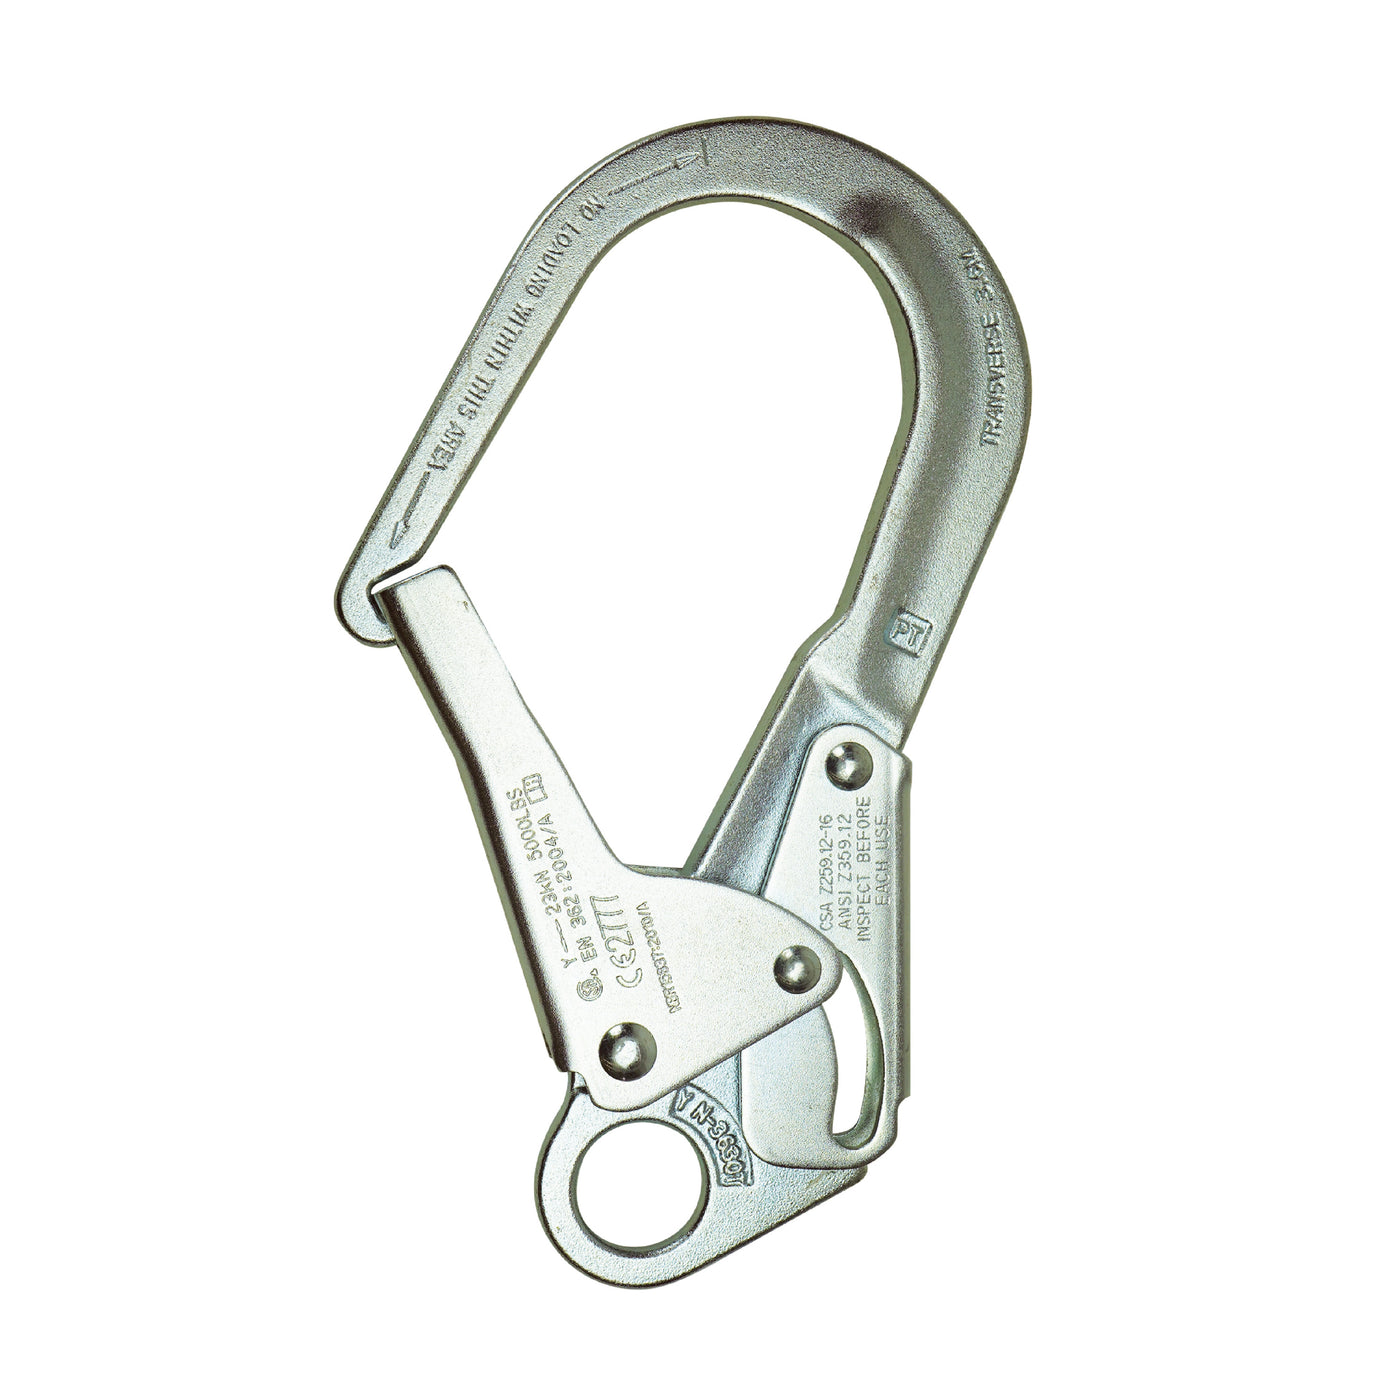 Rebar Snap Hook – Infinity Snap hook Forged of Steel and Cadmium Finish – Silver